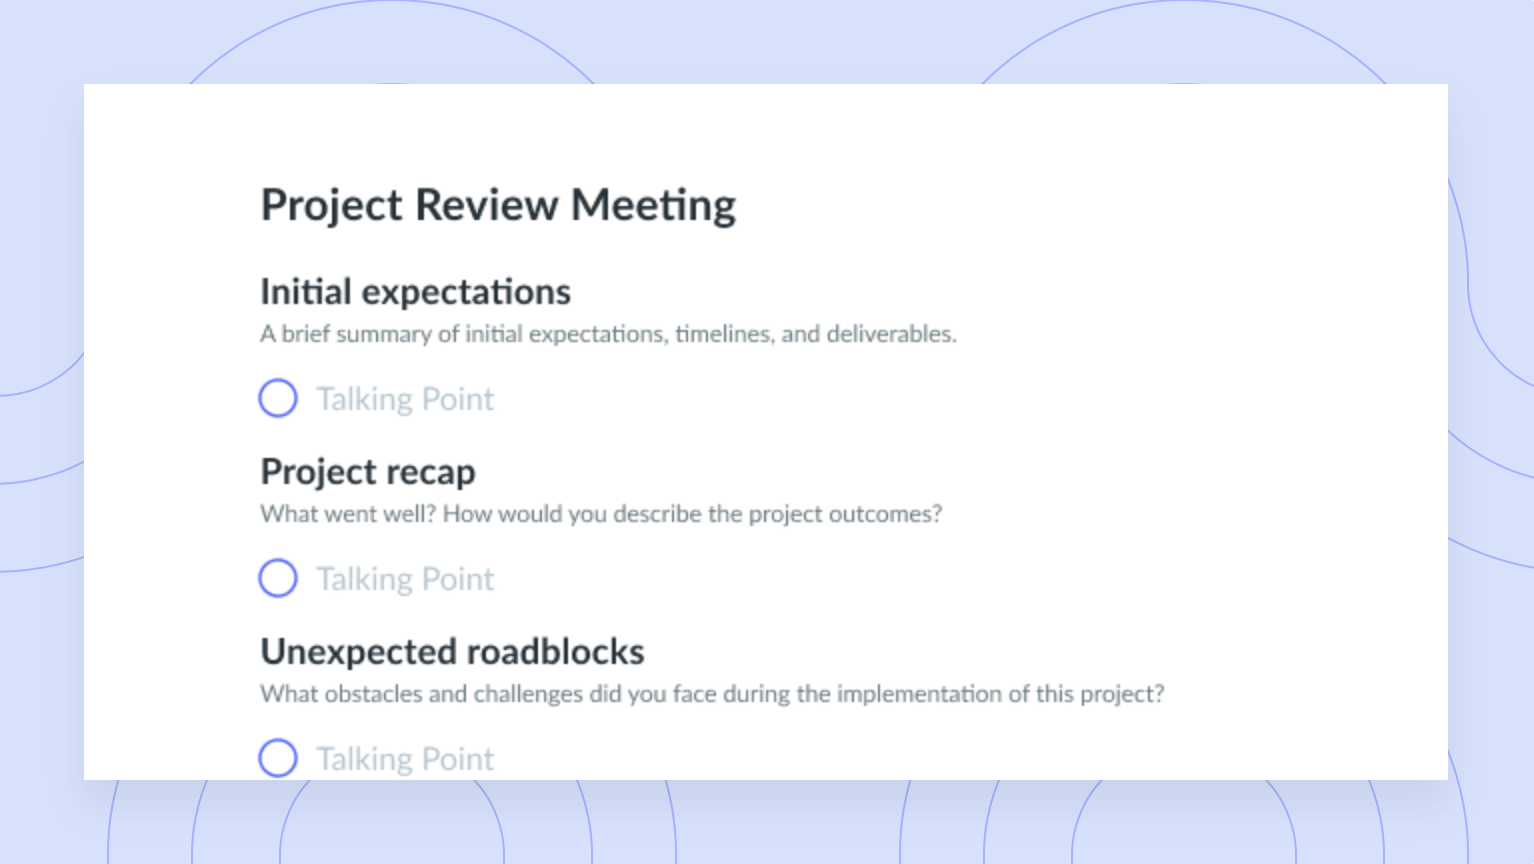 Project Review Meeting Agenda Template